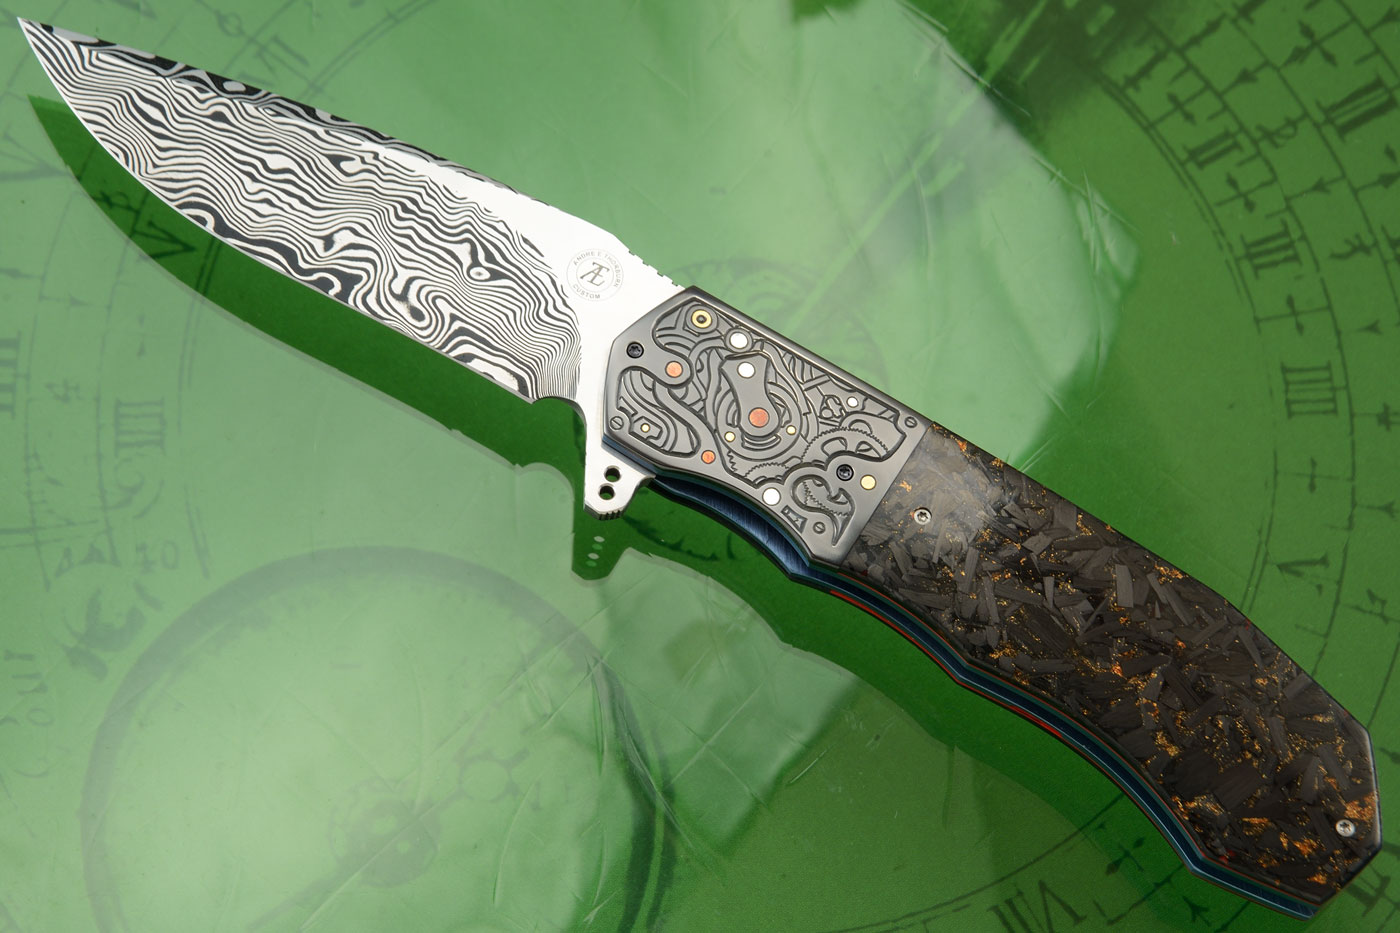 Gears - L44M Flipper with Bronze Shred Carbon Fiber, Damascus, and Engraved Zirc (Ceramic IKBS)